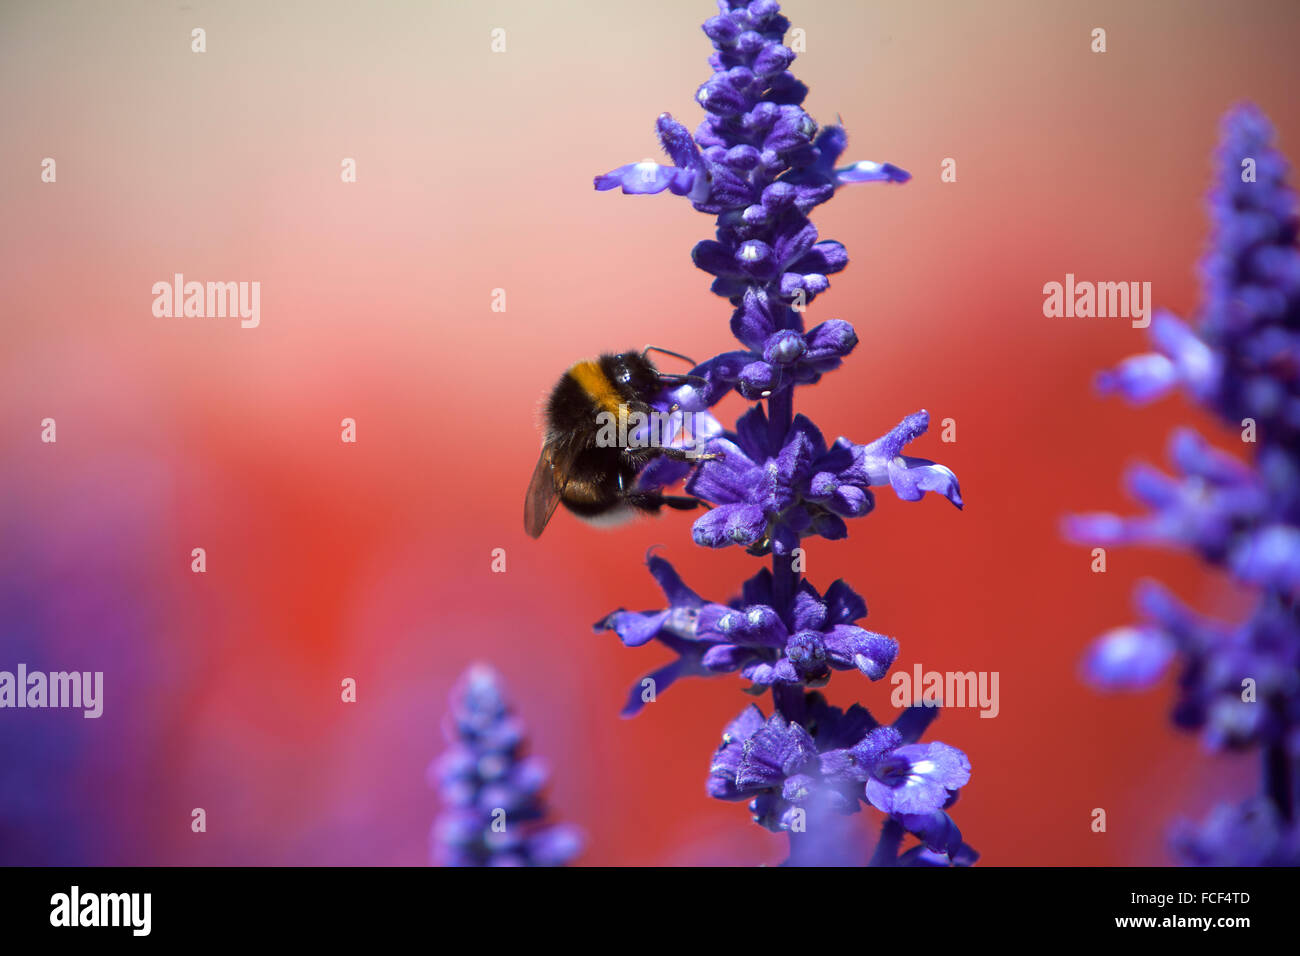 Closeup of a bumblebee in a field of purple salvia, summertime Stock Photo